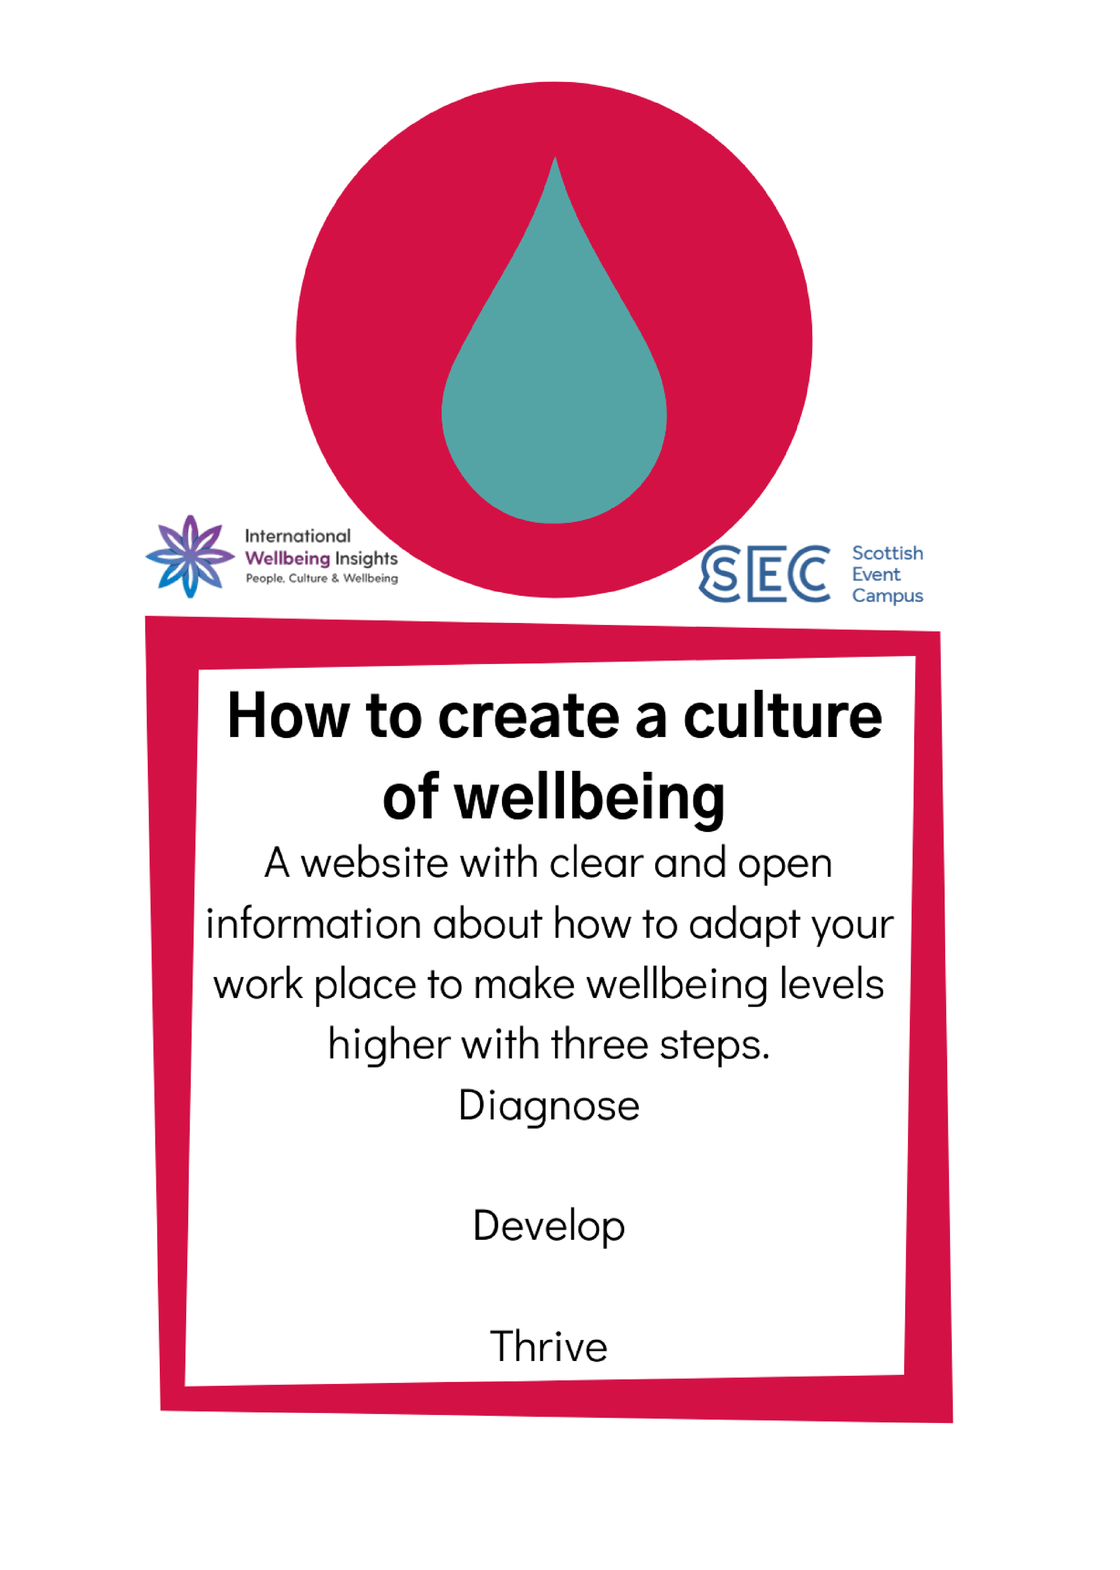 How to create a culture of wellbeing